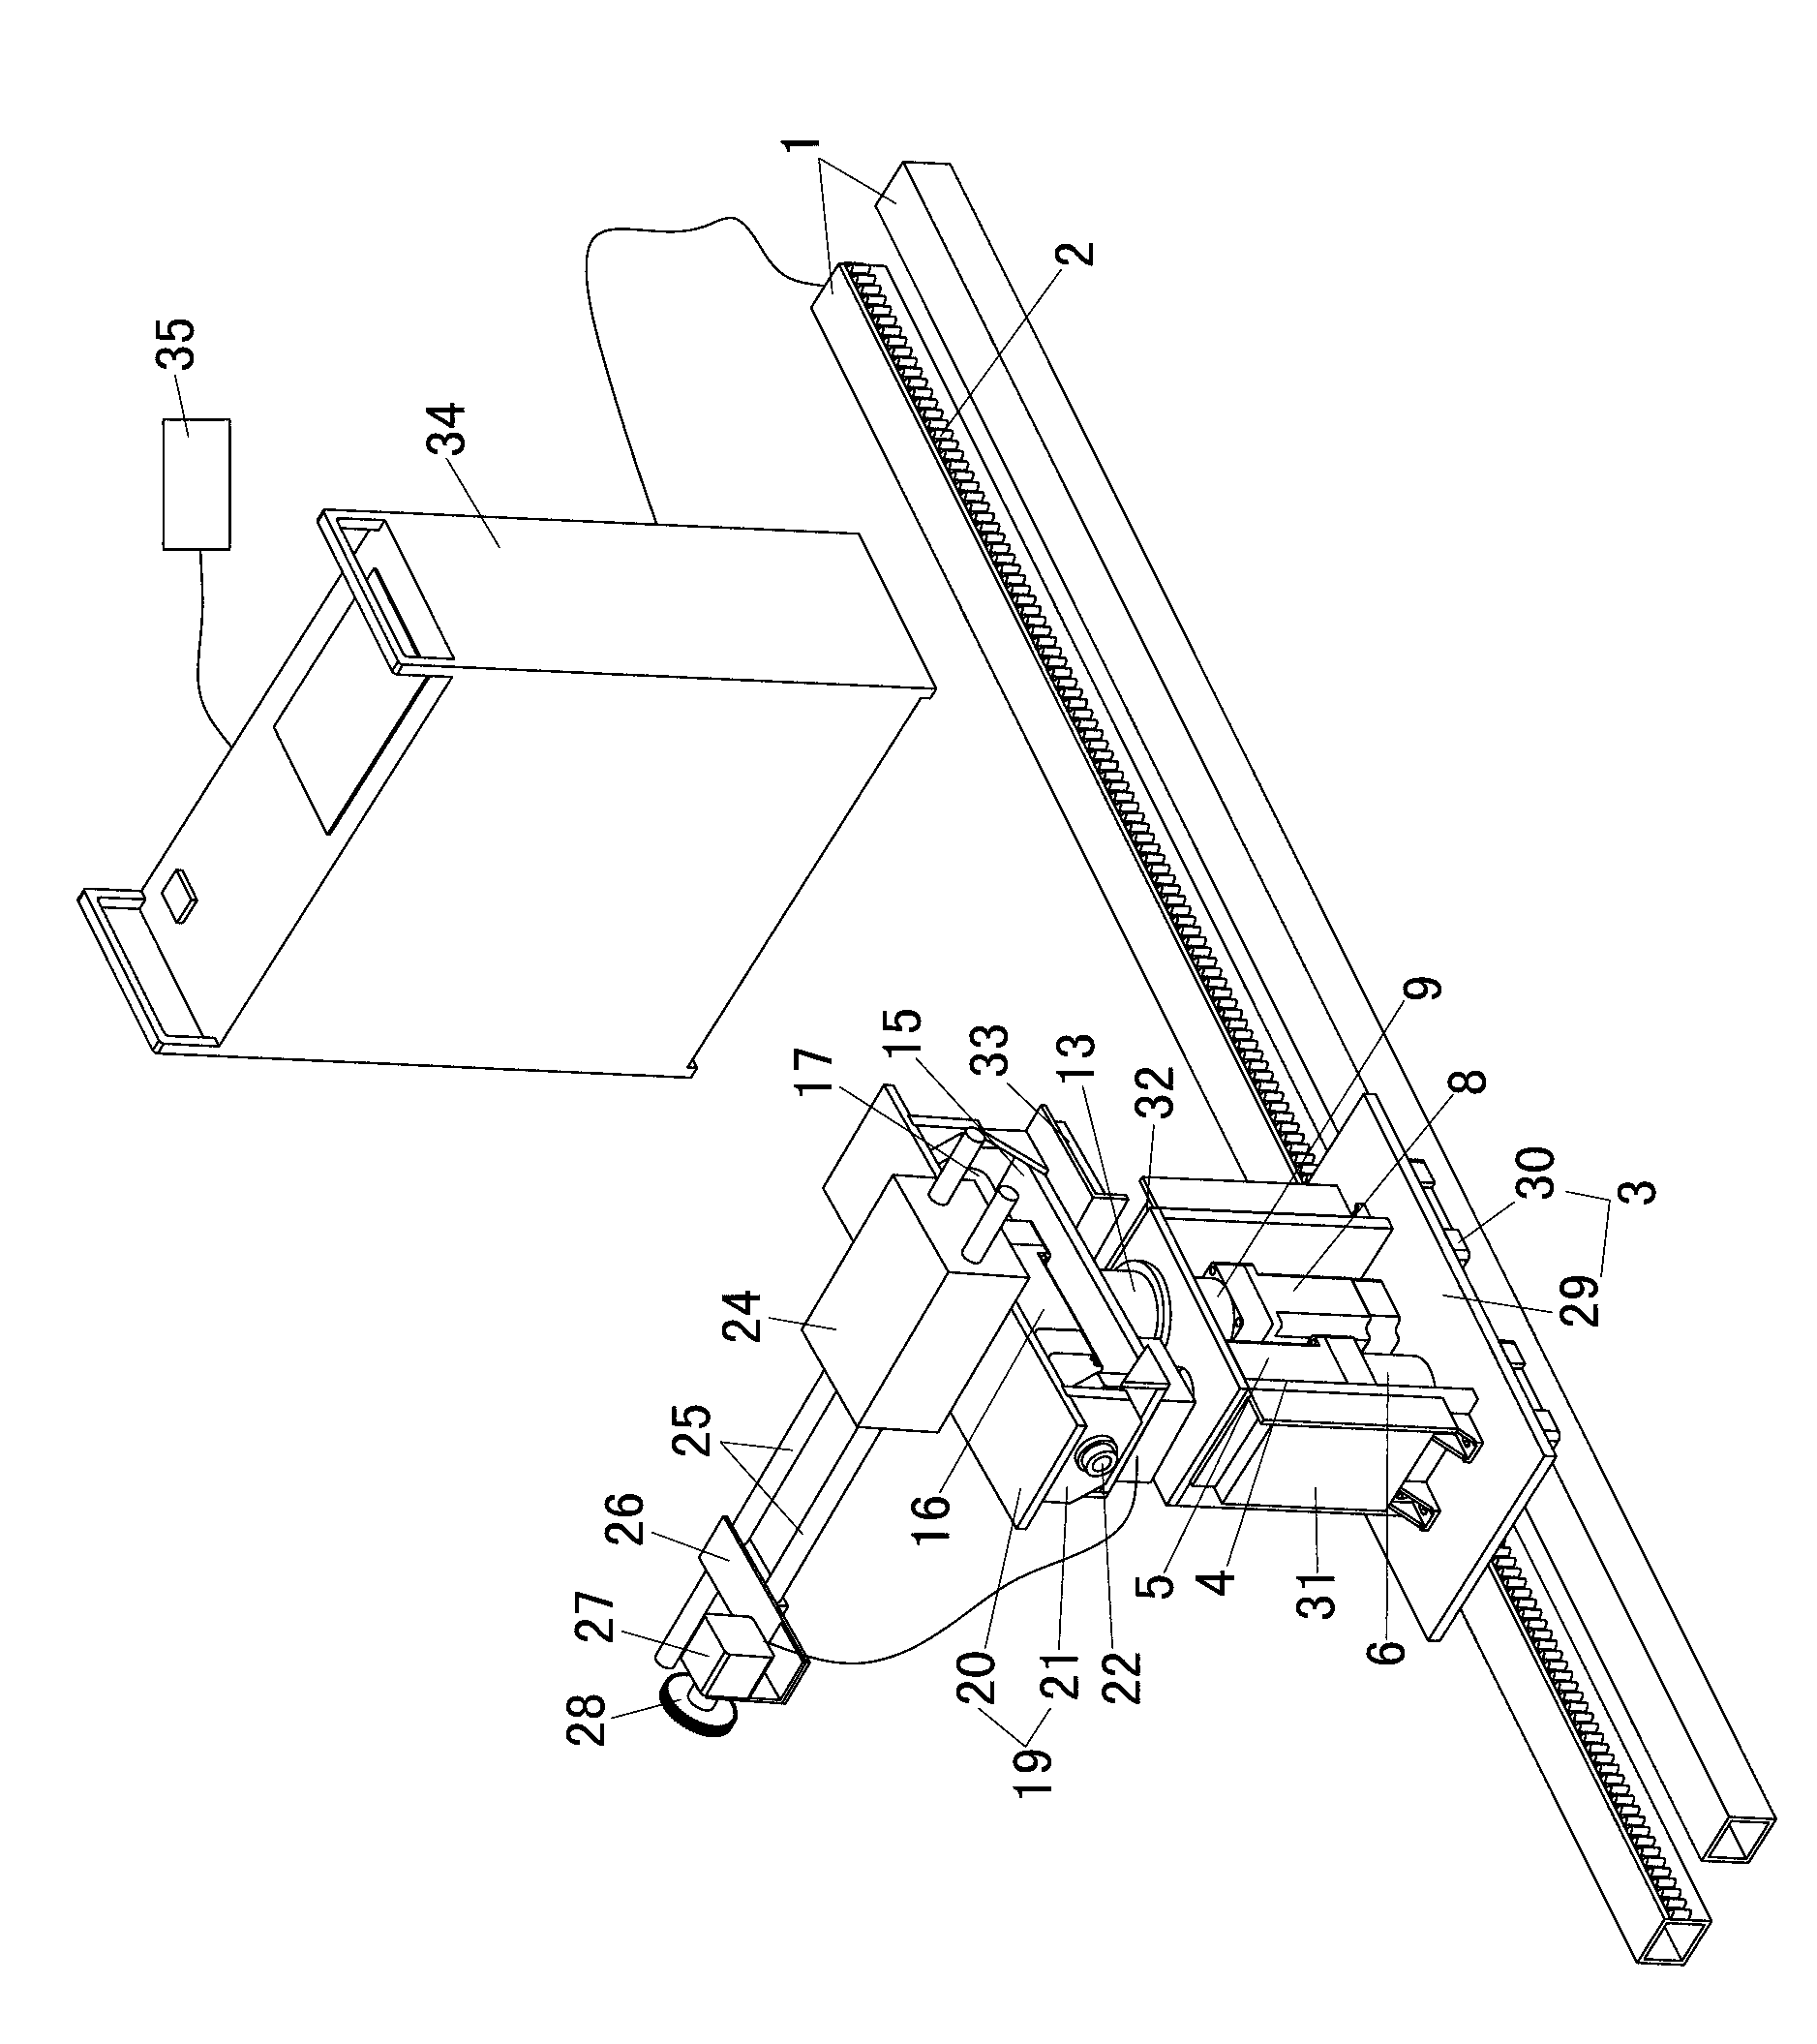 Photography motion control device